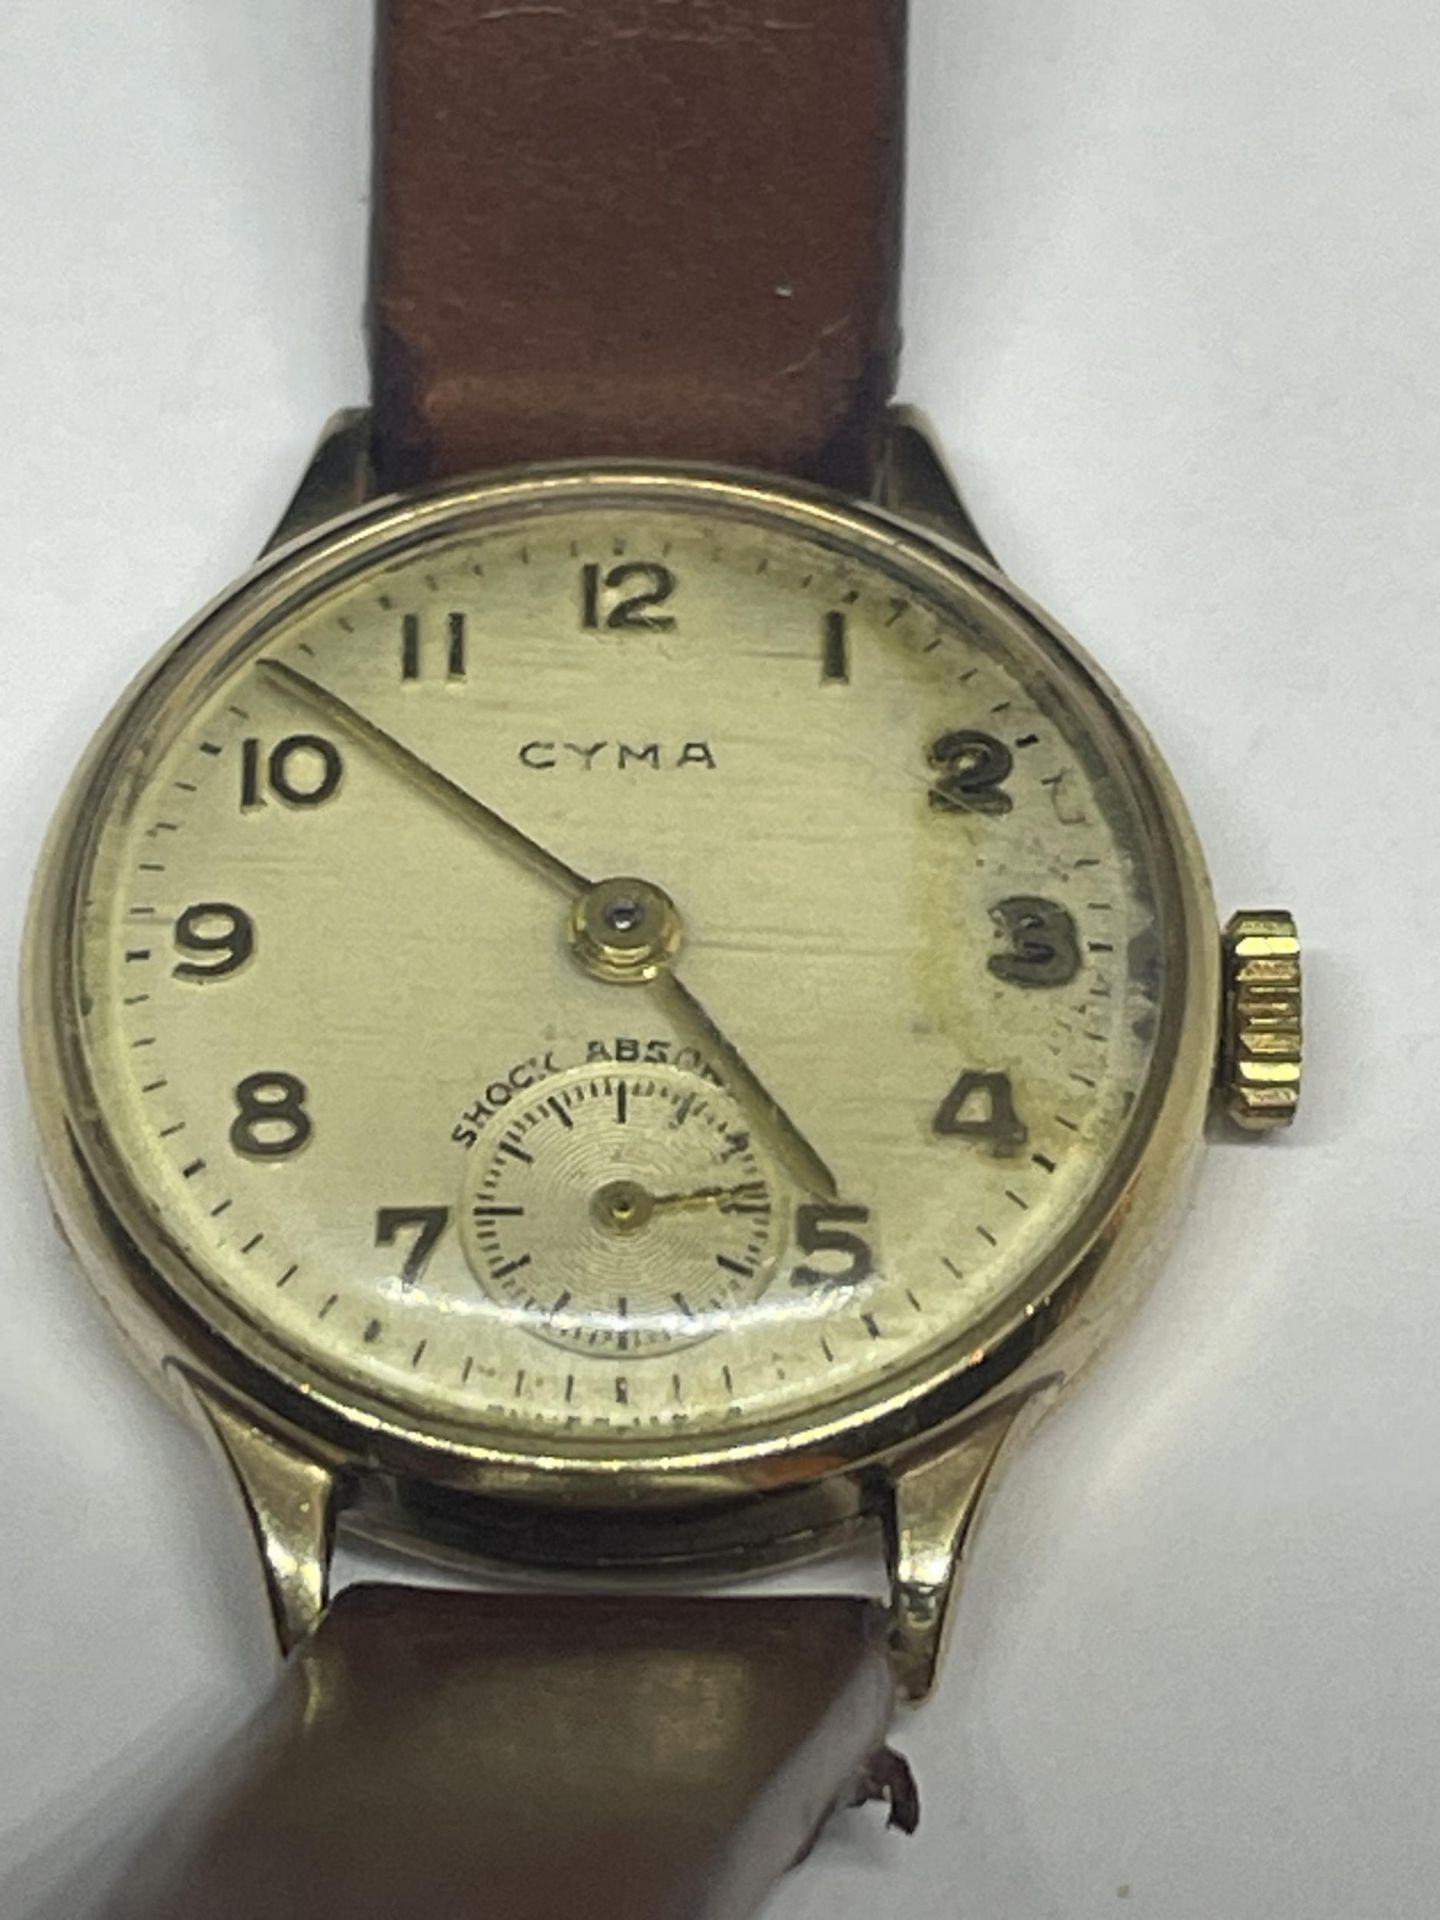 A LADIES CYMA 9 CARAT GOLD CASED WRIST WATCH WITH BROWN LEATHER STRAP SEEN WORKING AT THE TIME OF - Image 2 of 3